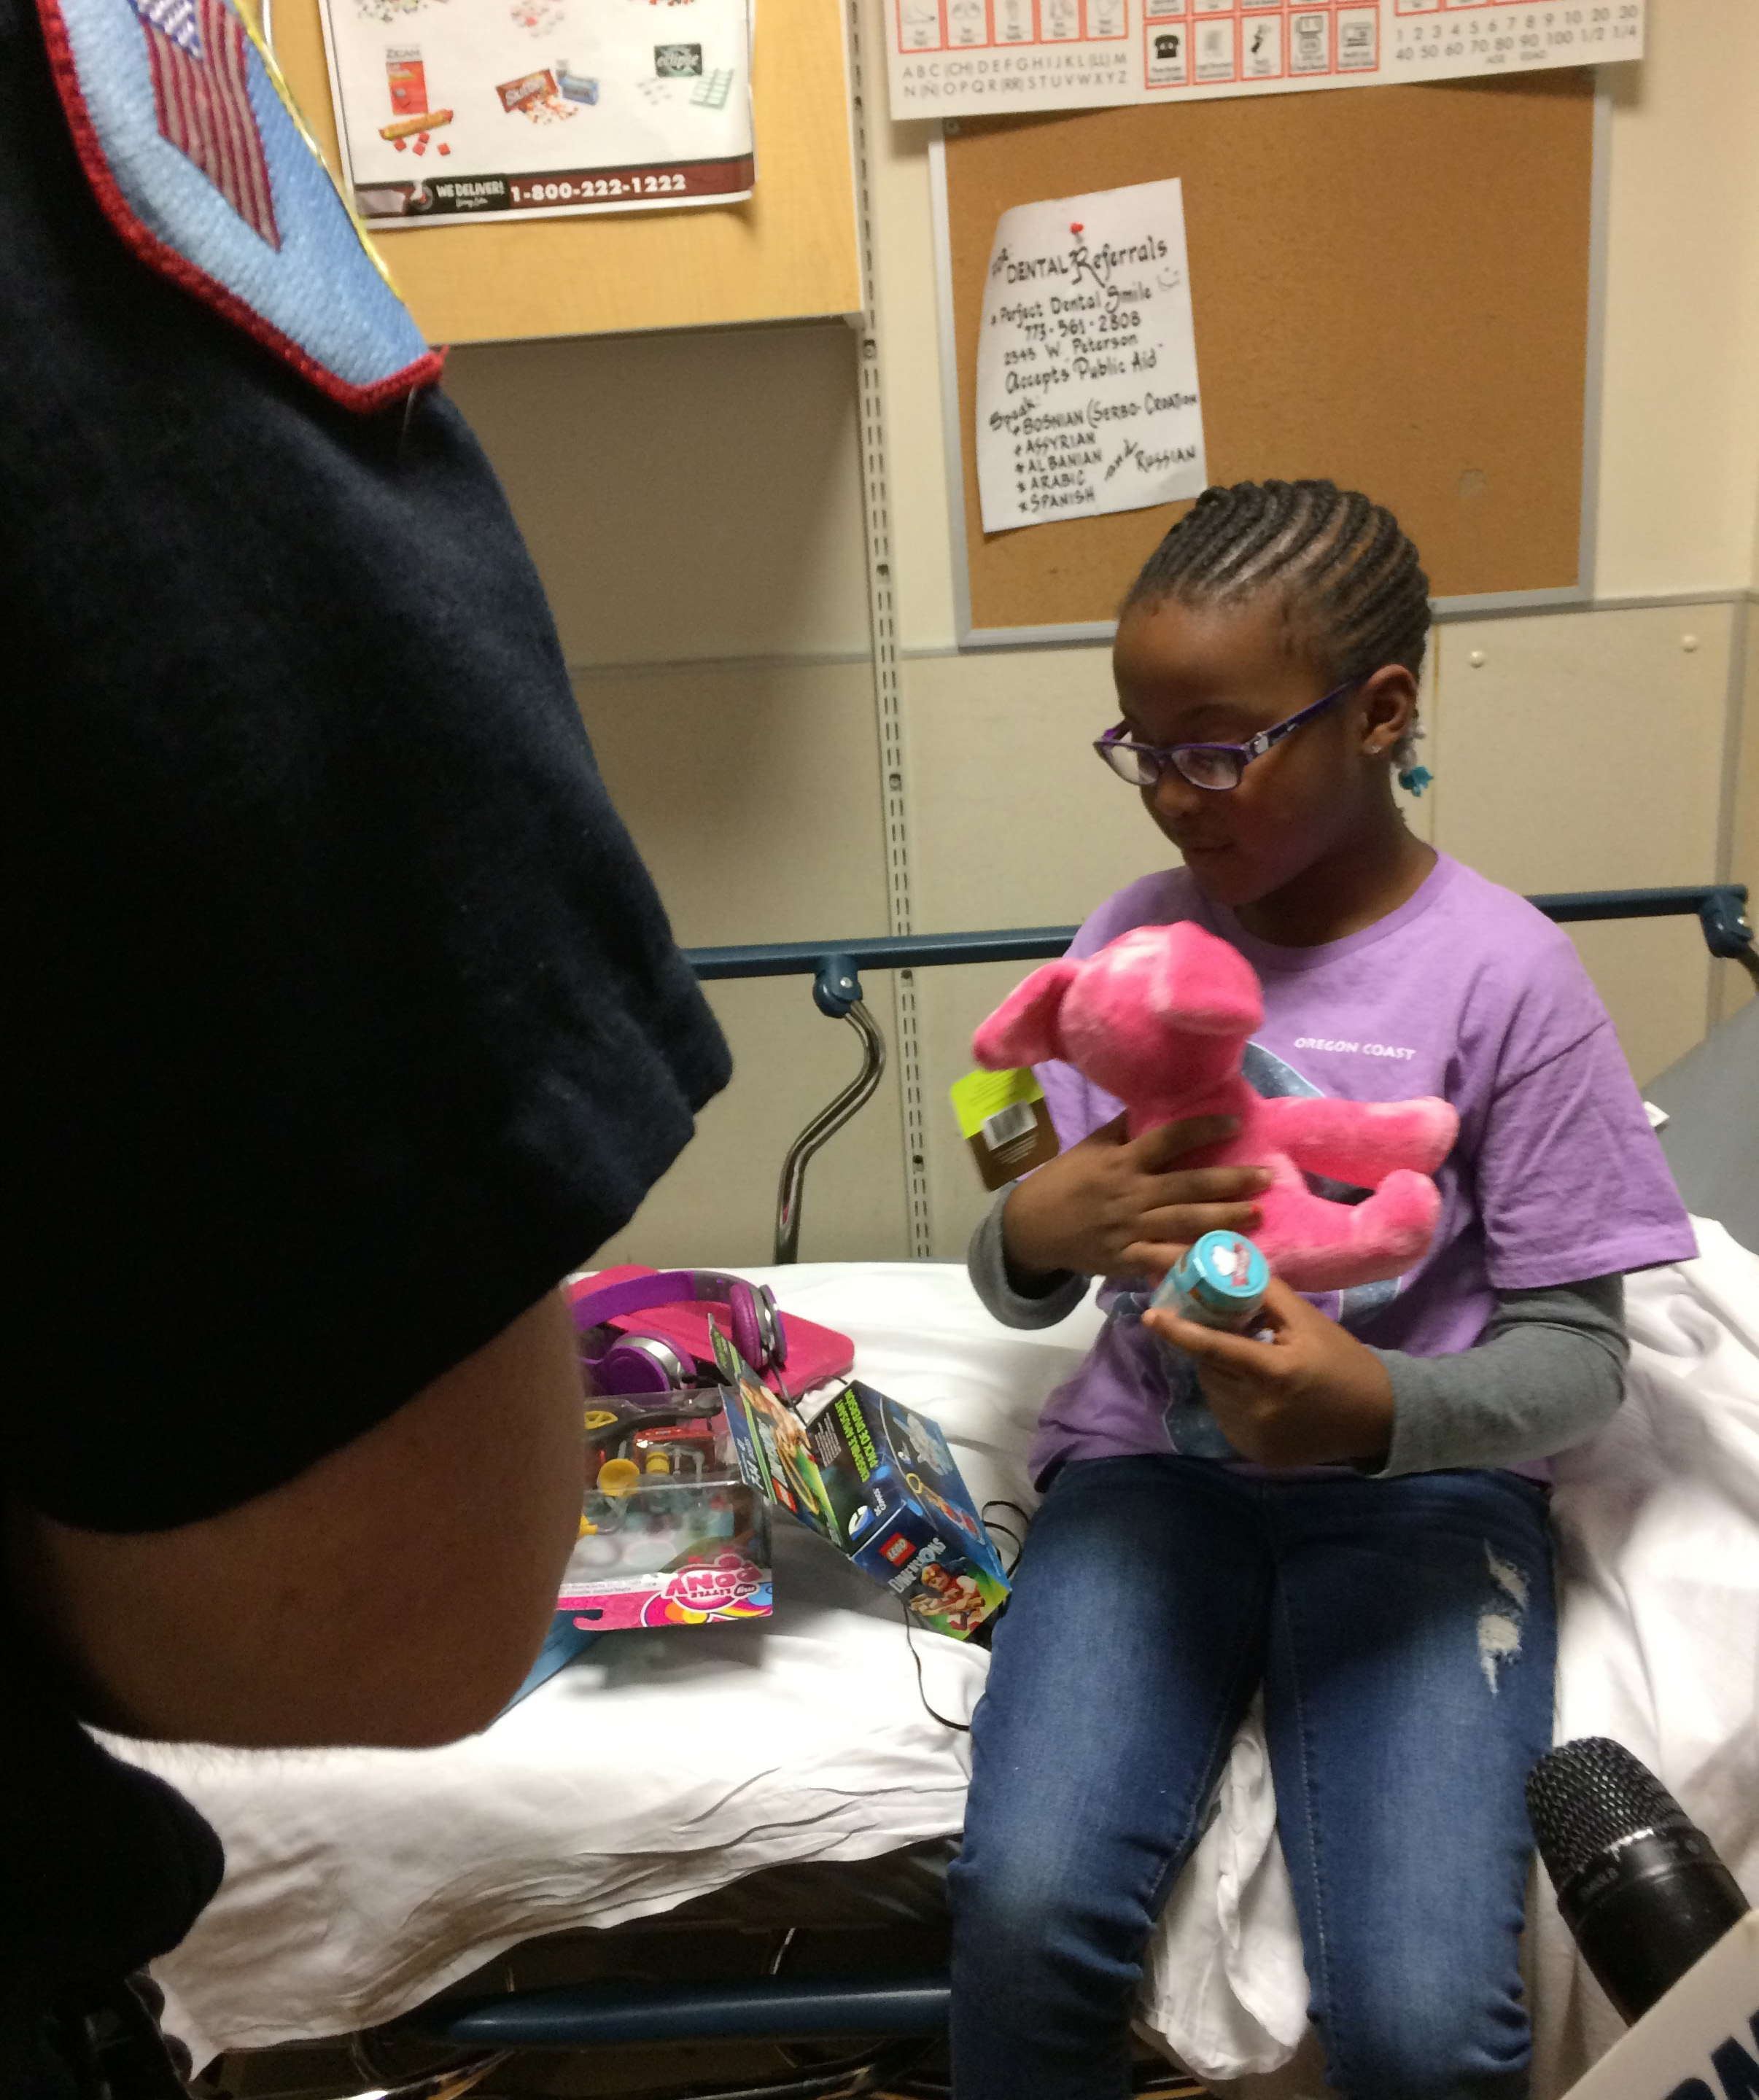 A girl gets toys at Swedish Covenant Hospital. (Michele Fiore/WBBM)